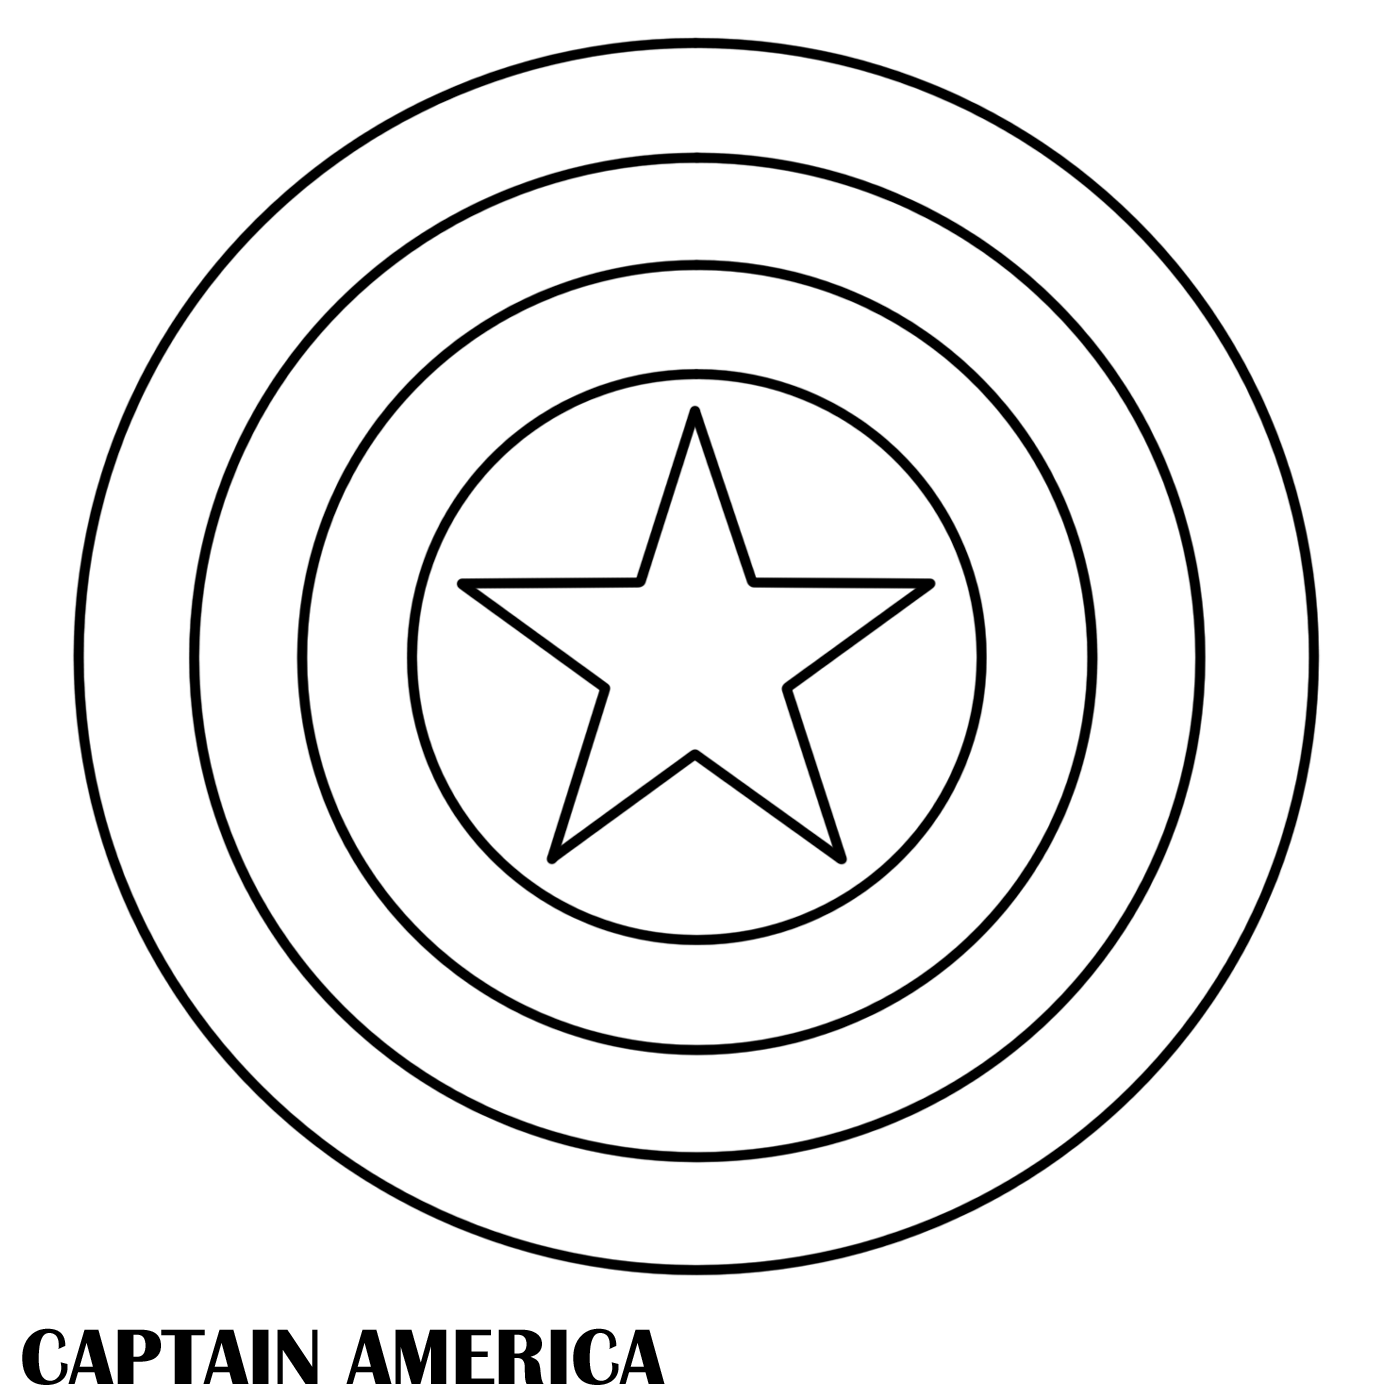 Captain America Logo Drawing | Captain America Coloring/Drawing Pages |  Outline Vector | Printable Cartoon Photos | Free Download | Cool ASCII Text  Art 4 U